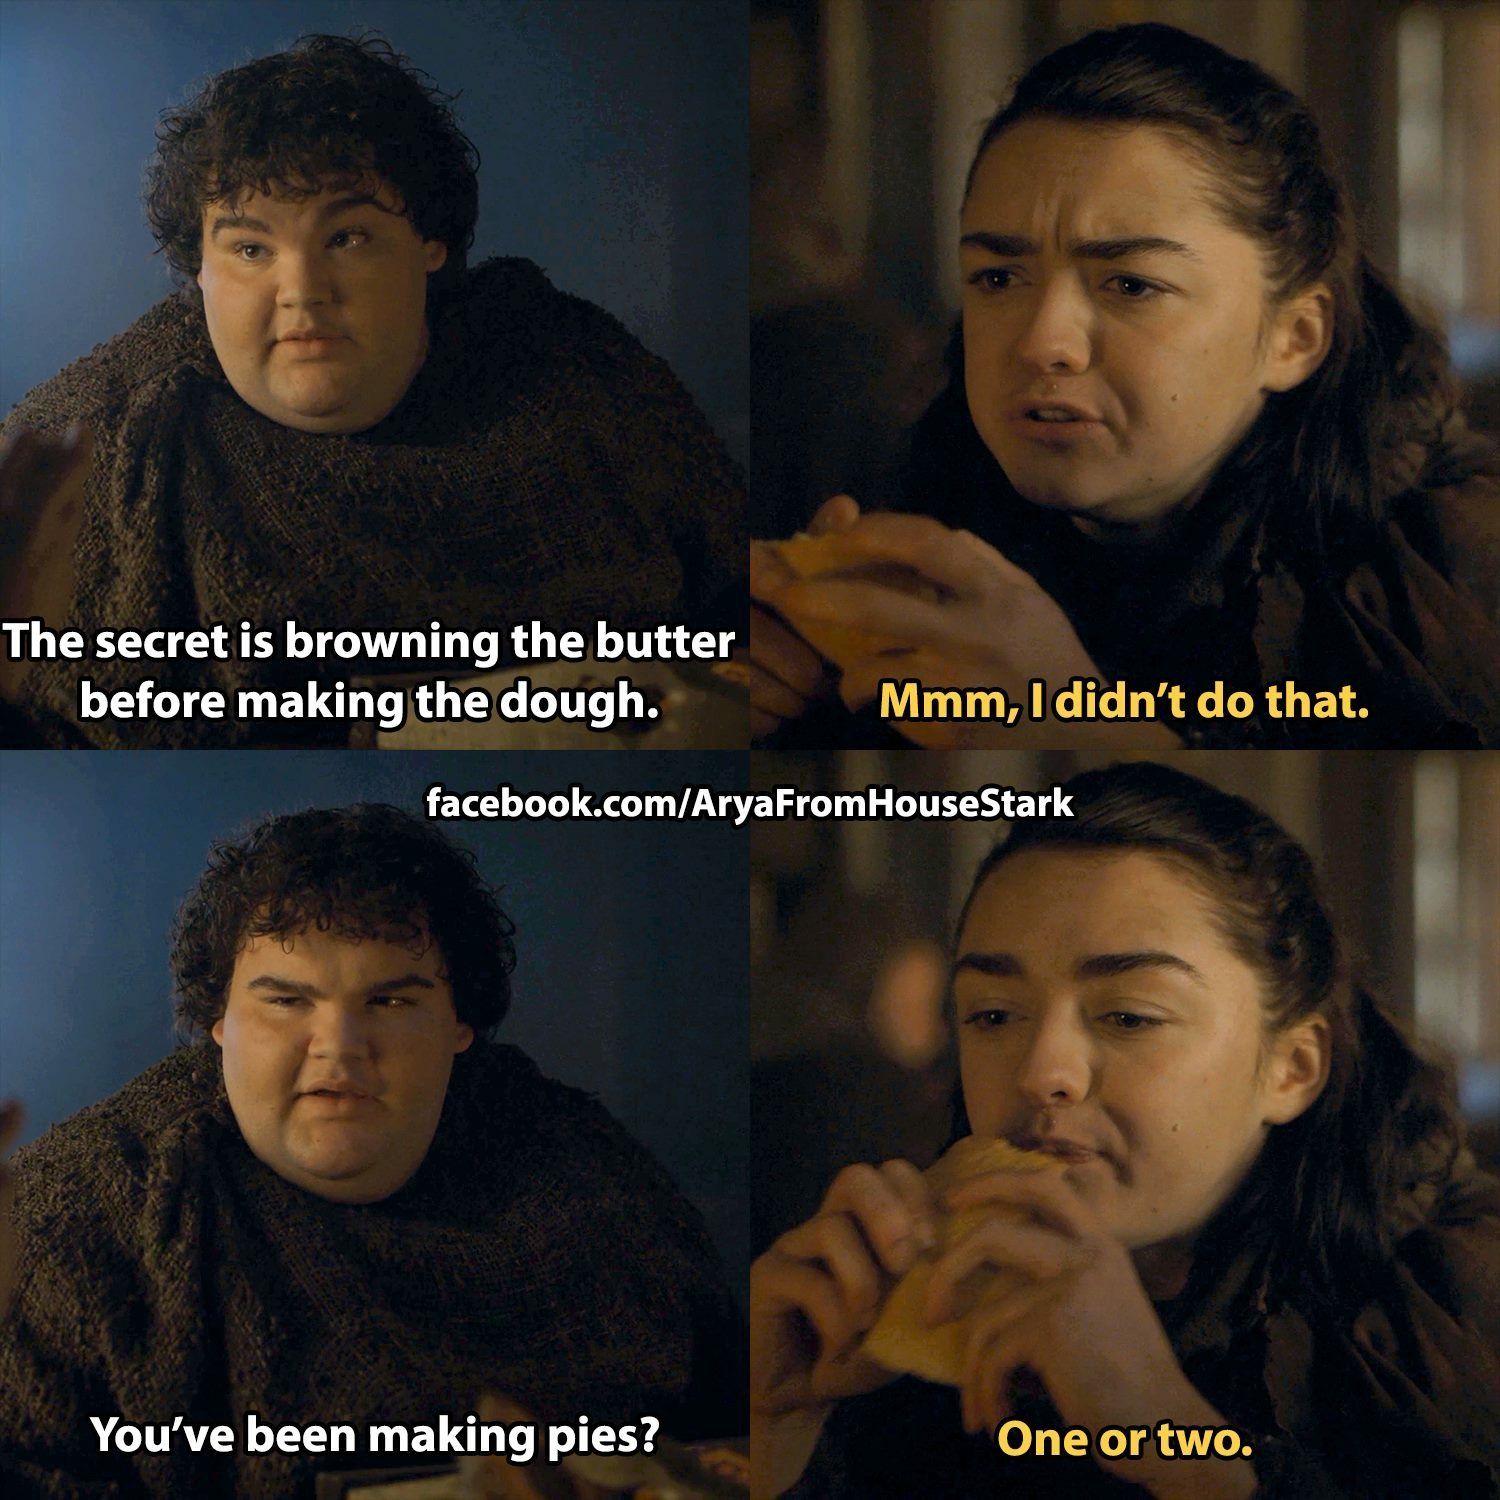 Game Of Thrones 10 House Stark Memes That Will Have You CryLaughing